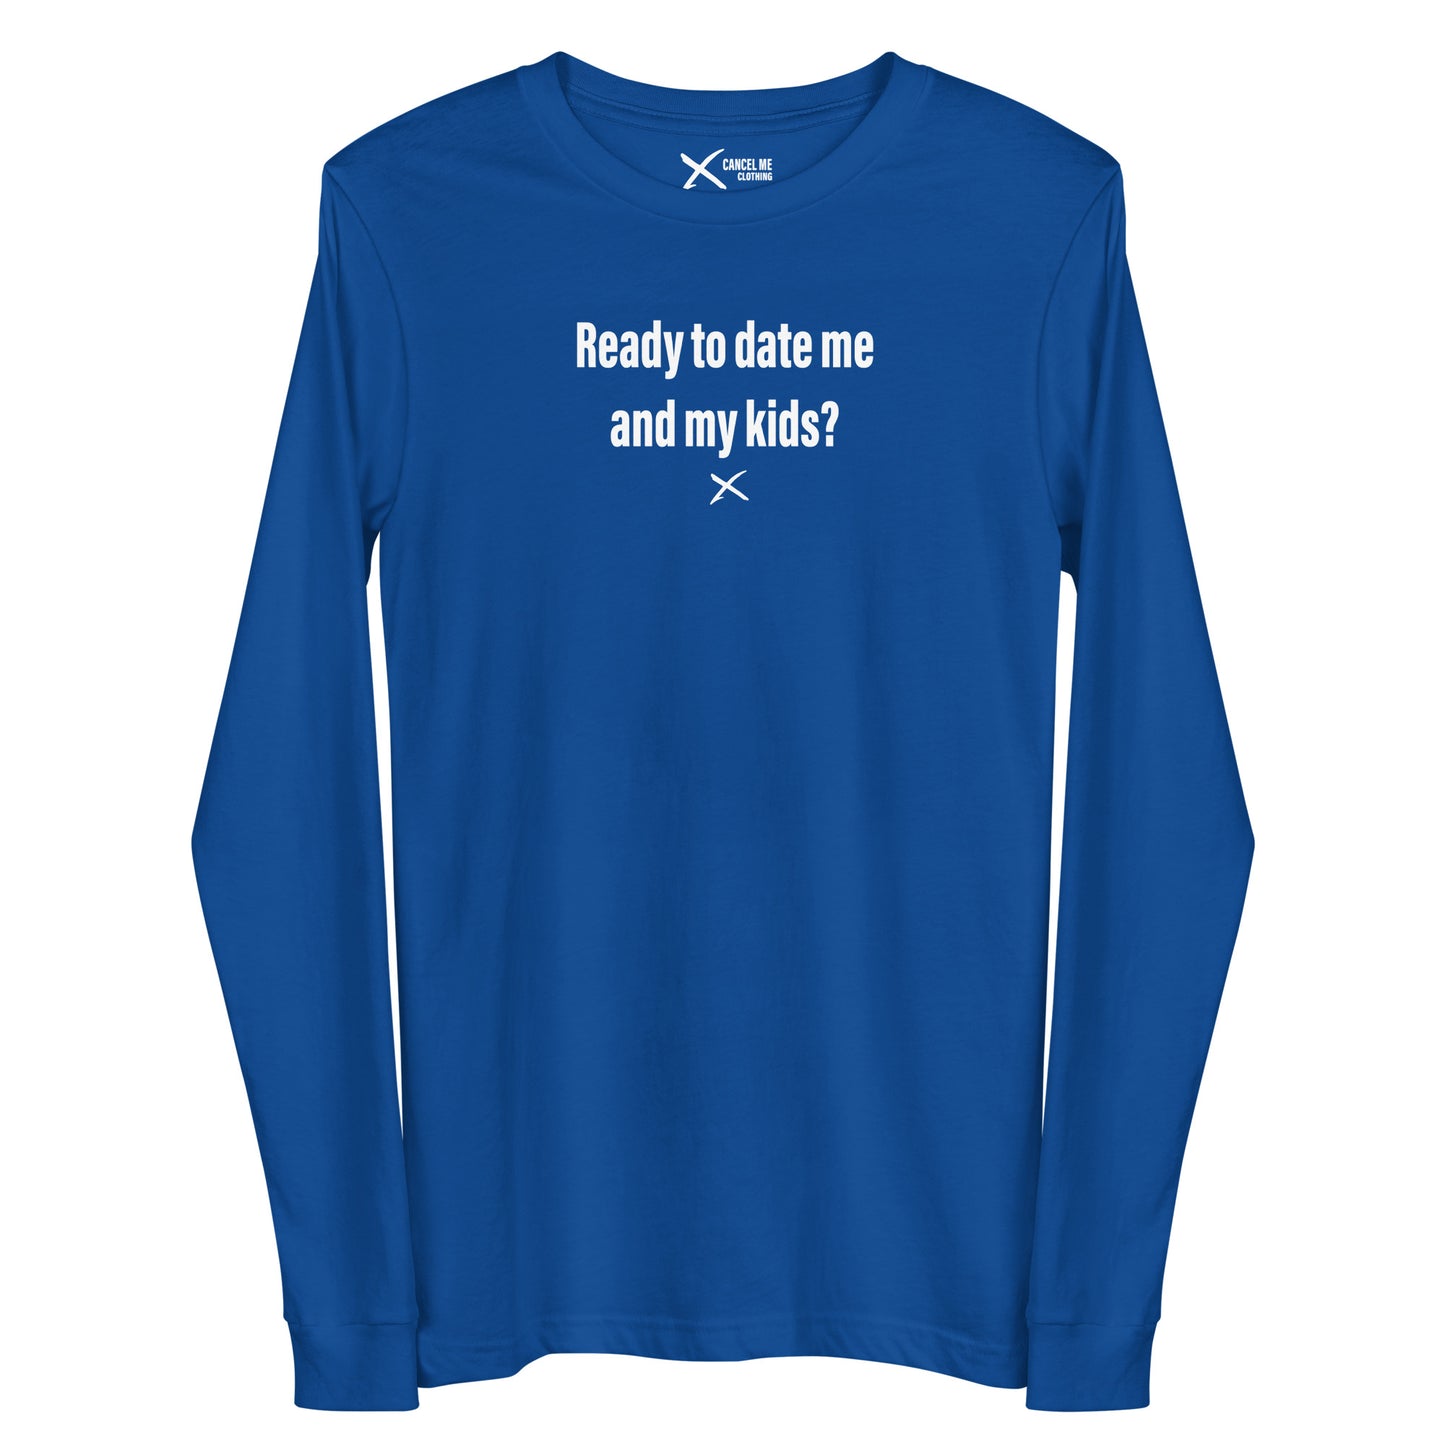 Ready to date me and my kids? - Longsleeve